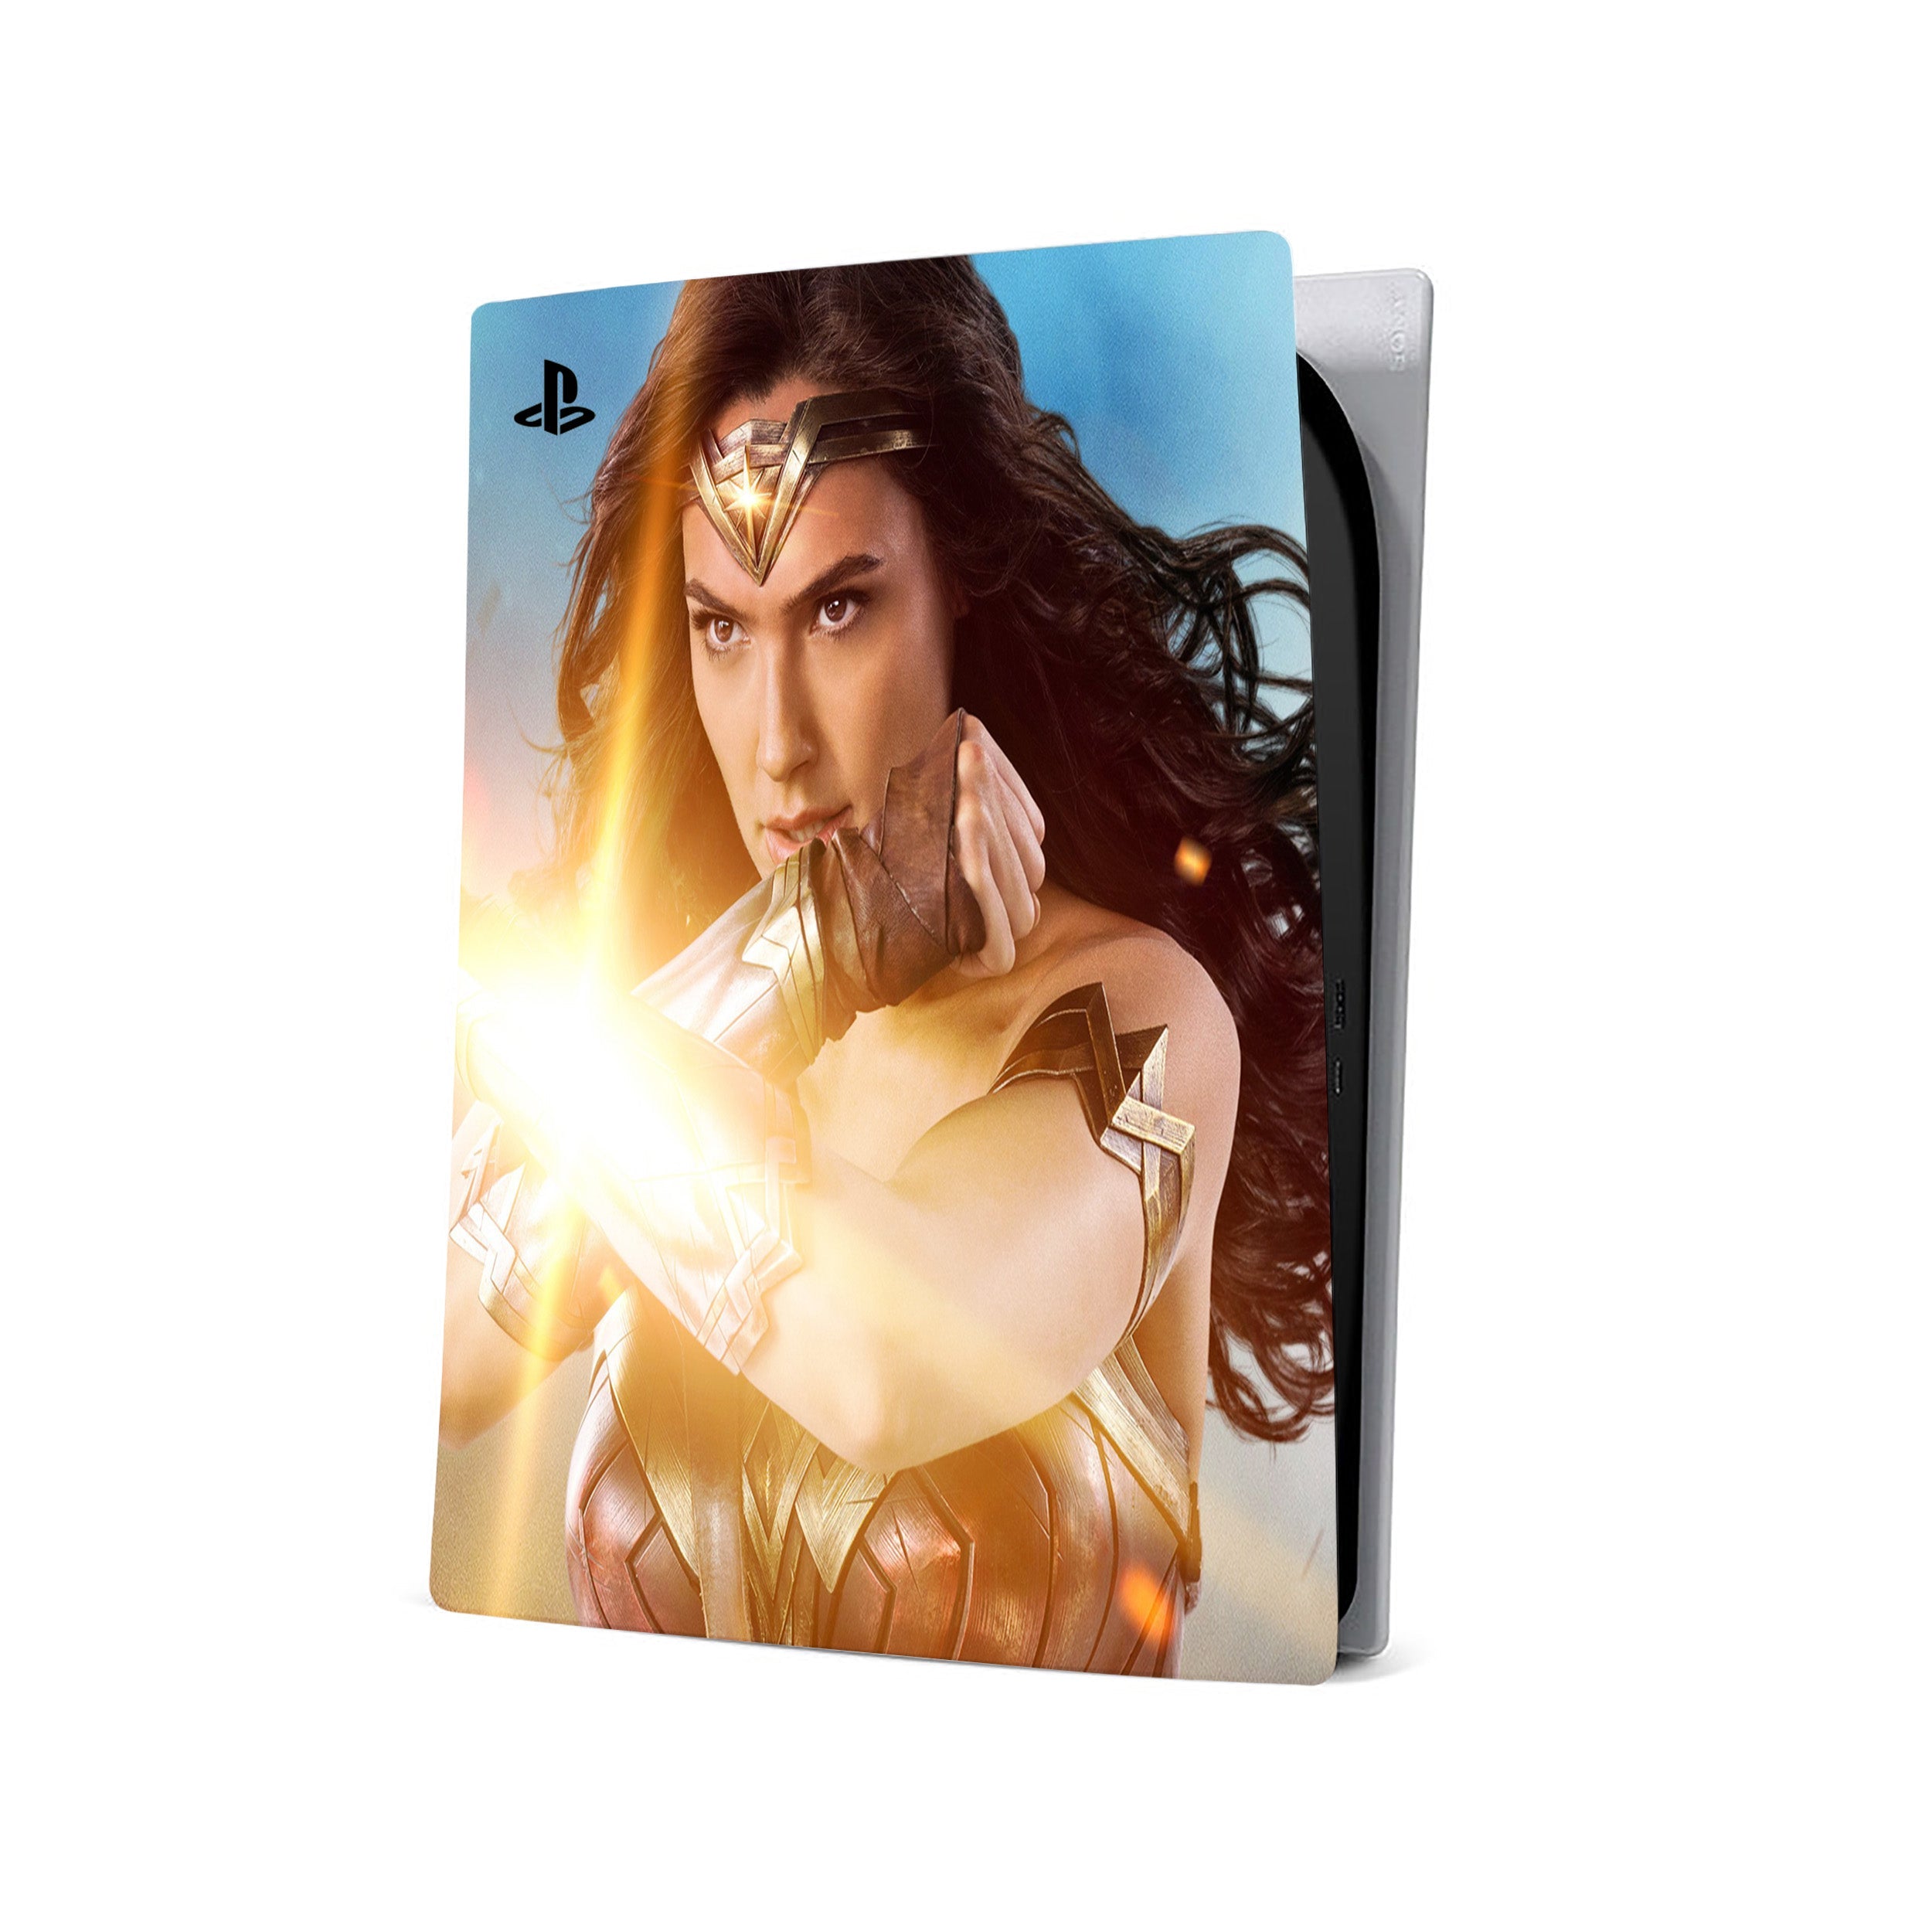 A video game skin featuring a DC Wonder Woman design for the PS5.